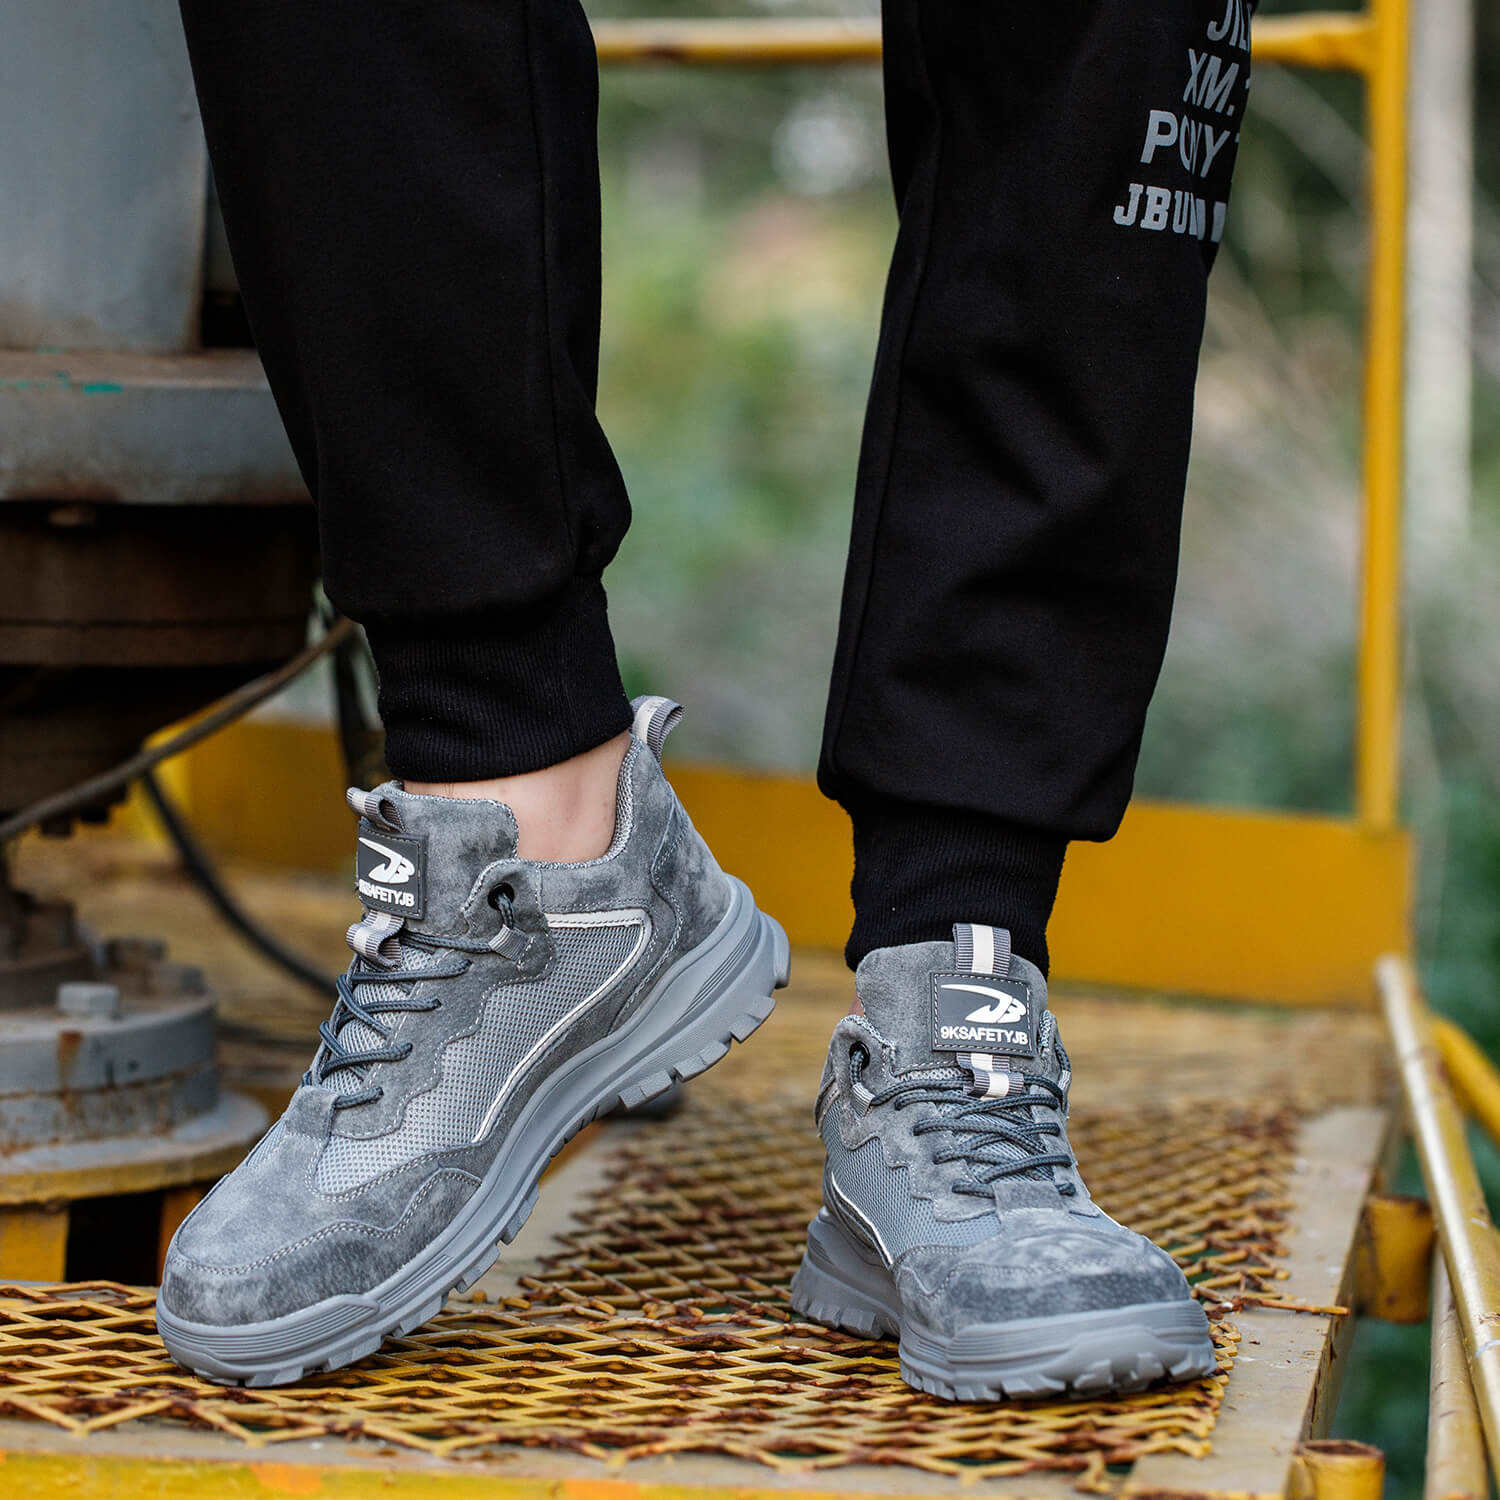 Shop Comfortable Steel Toe Shoes & Work Boots